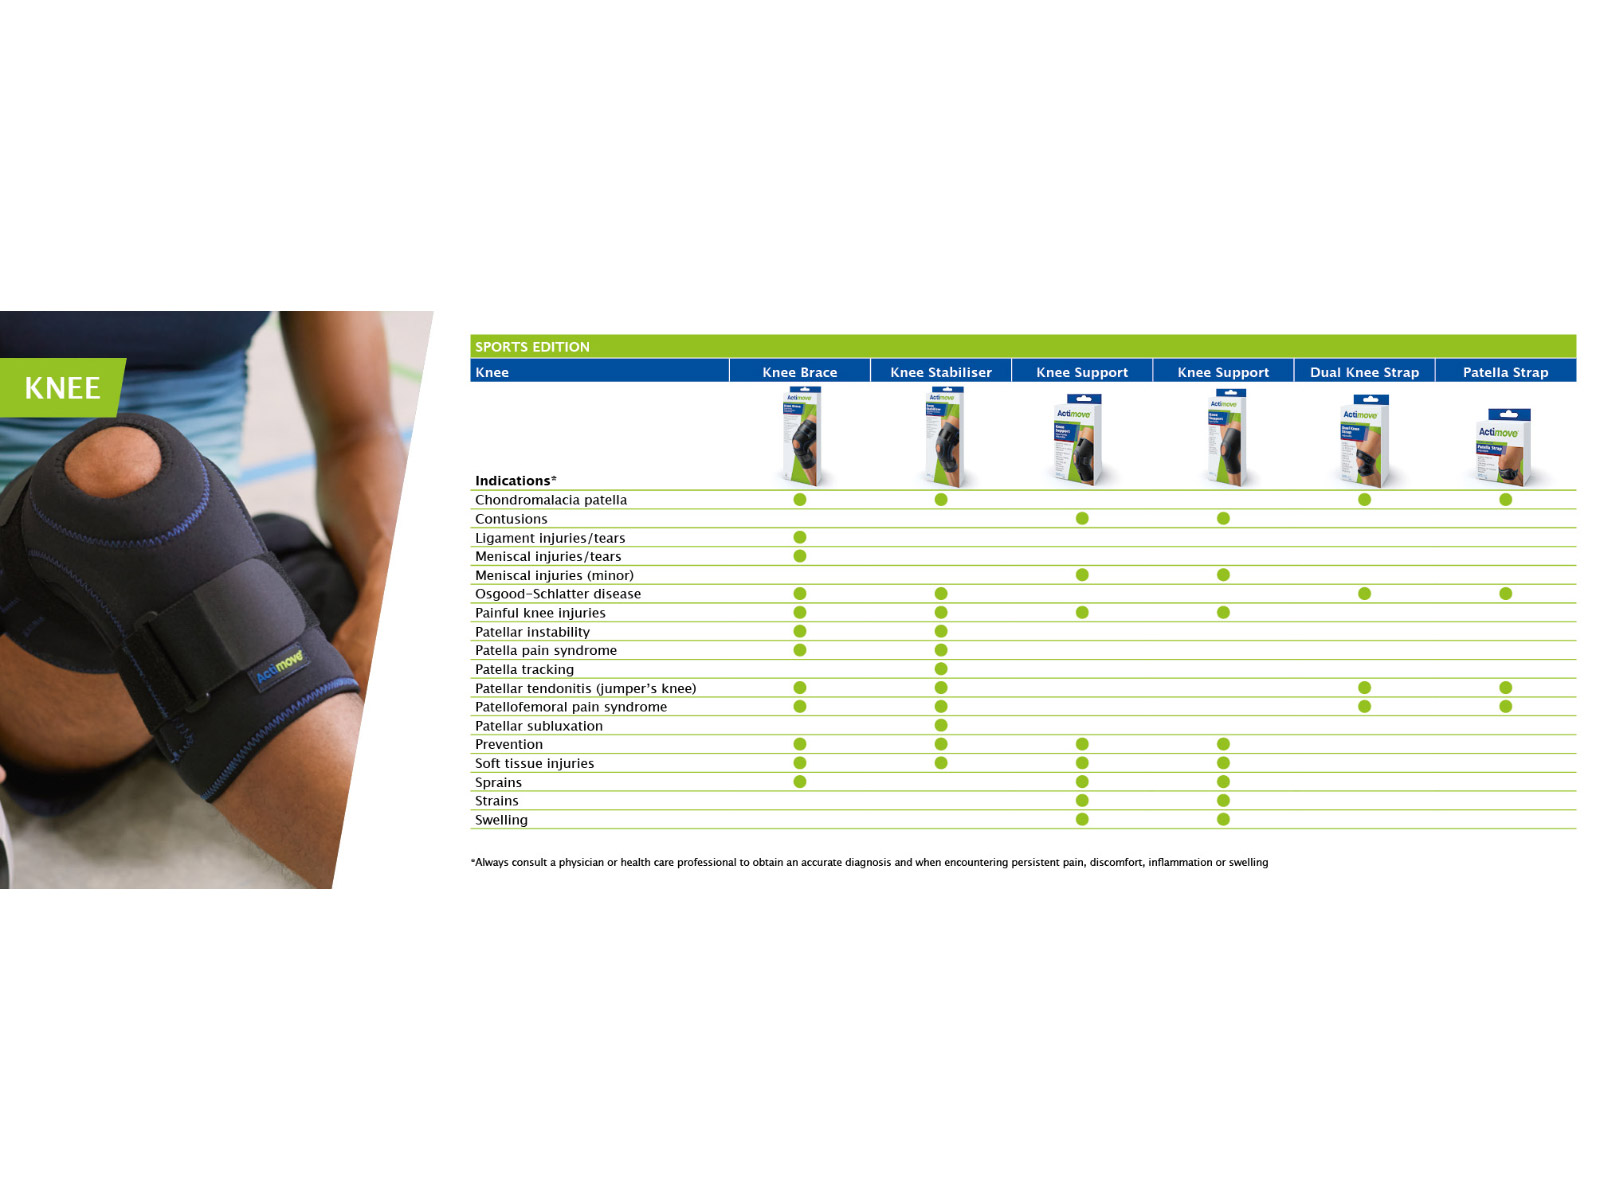 Dual Knee Strap support for Sports, Injury and Pain relief